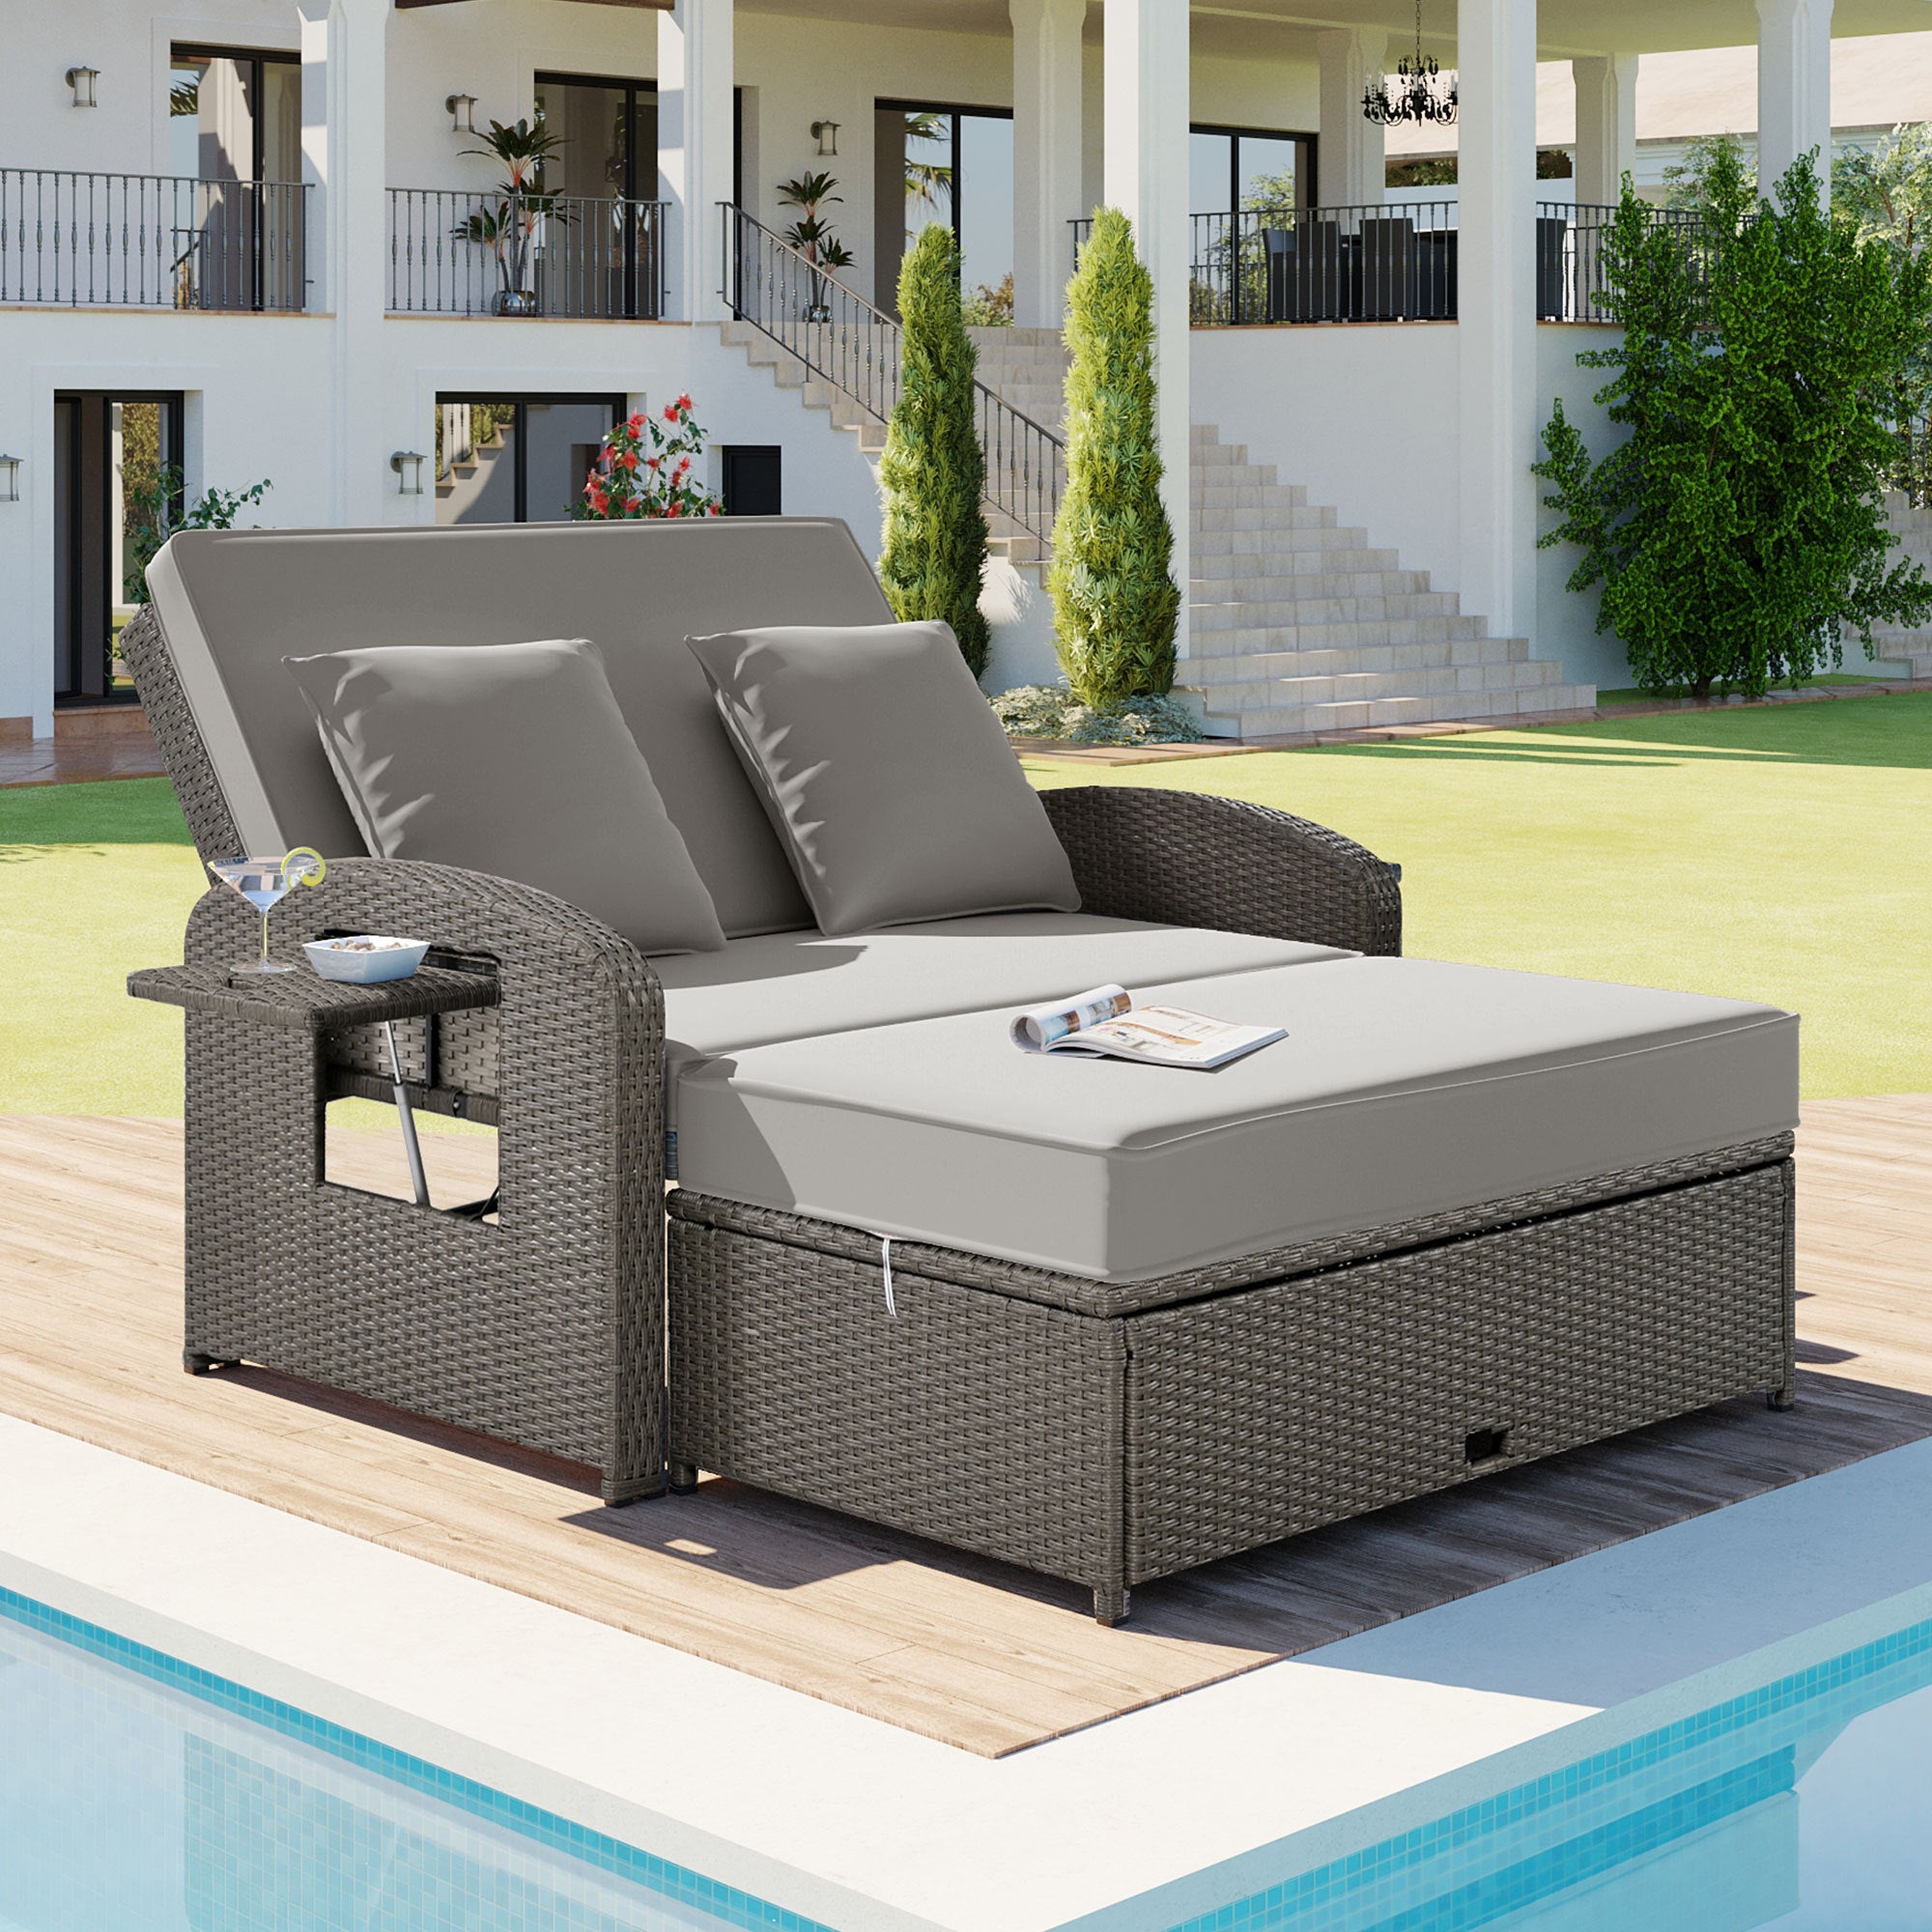 2-Person Patio Wicker Chaise Lounge Reclining Daybed with Adjustable Back, Cushions & Protection Cover,Gray